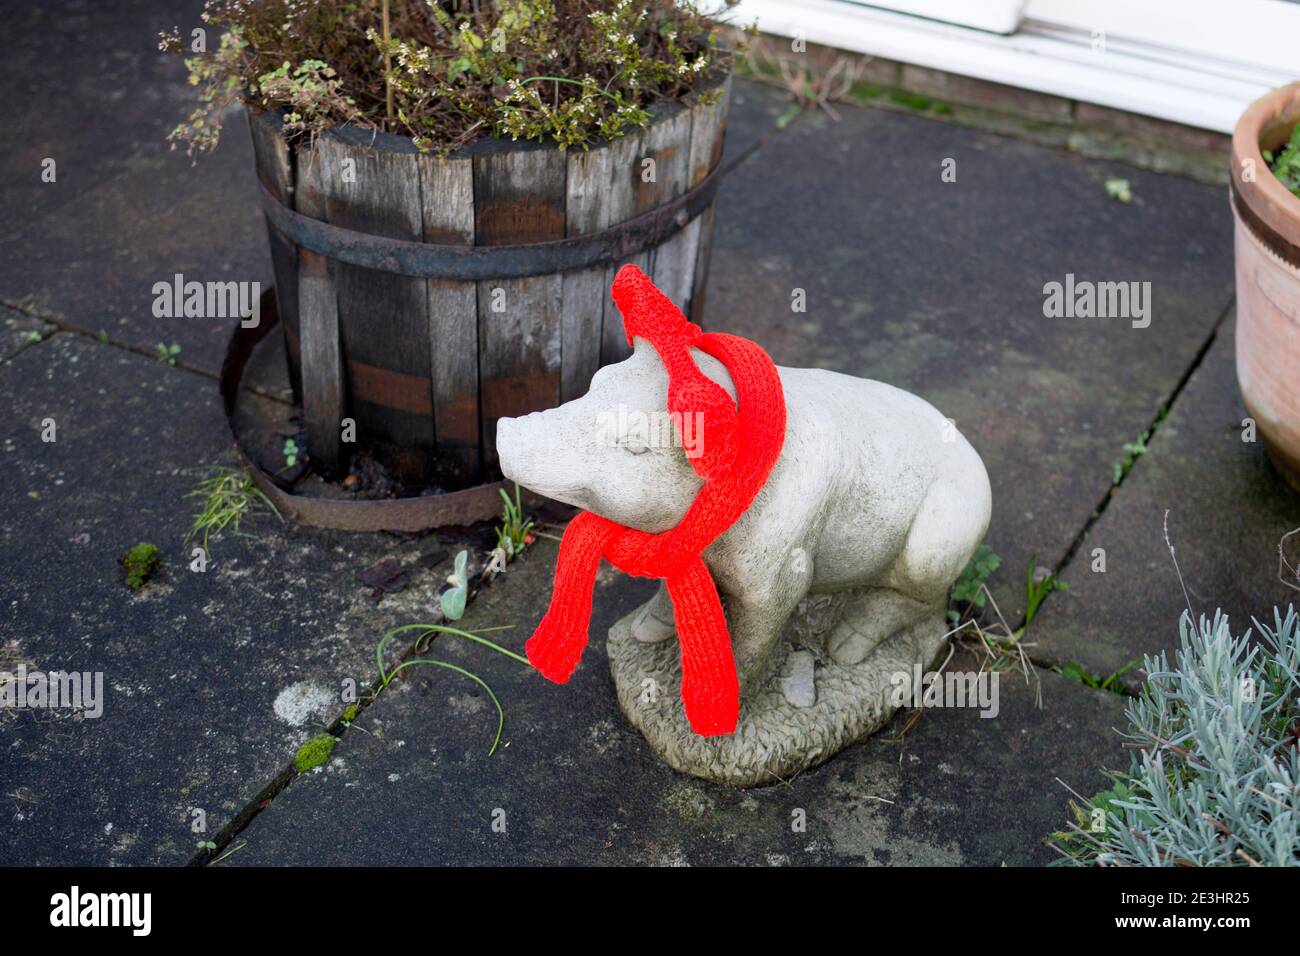 A concrete model pig wearing a red scarf Stock Photo